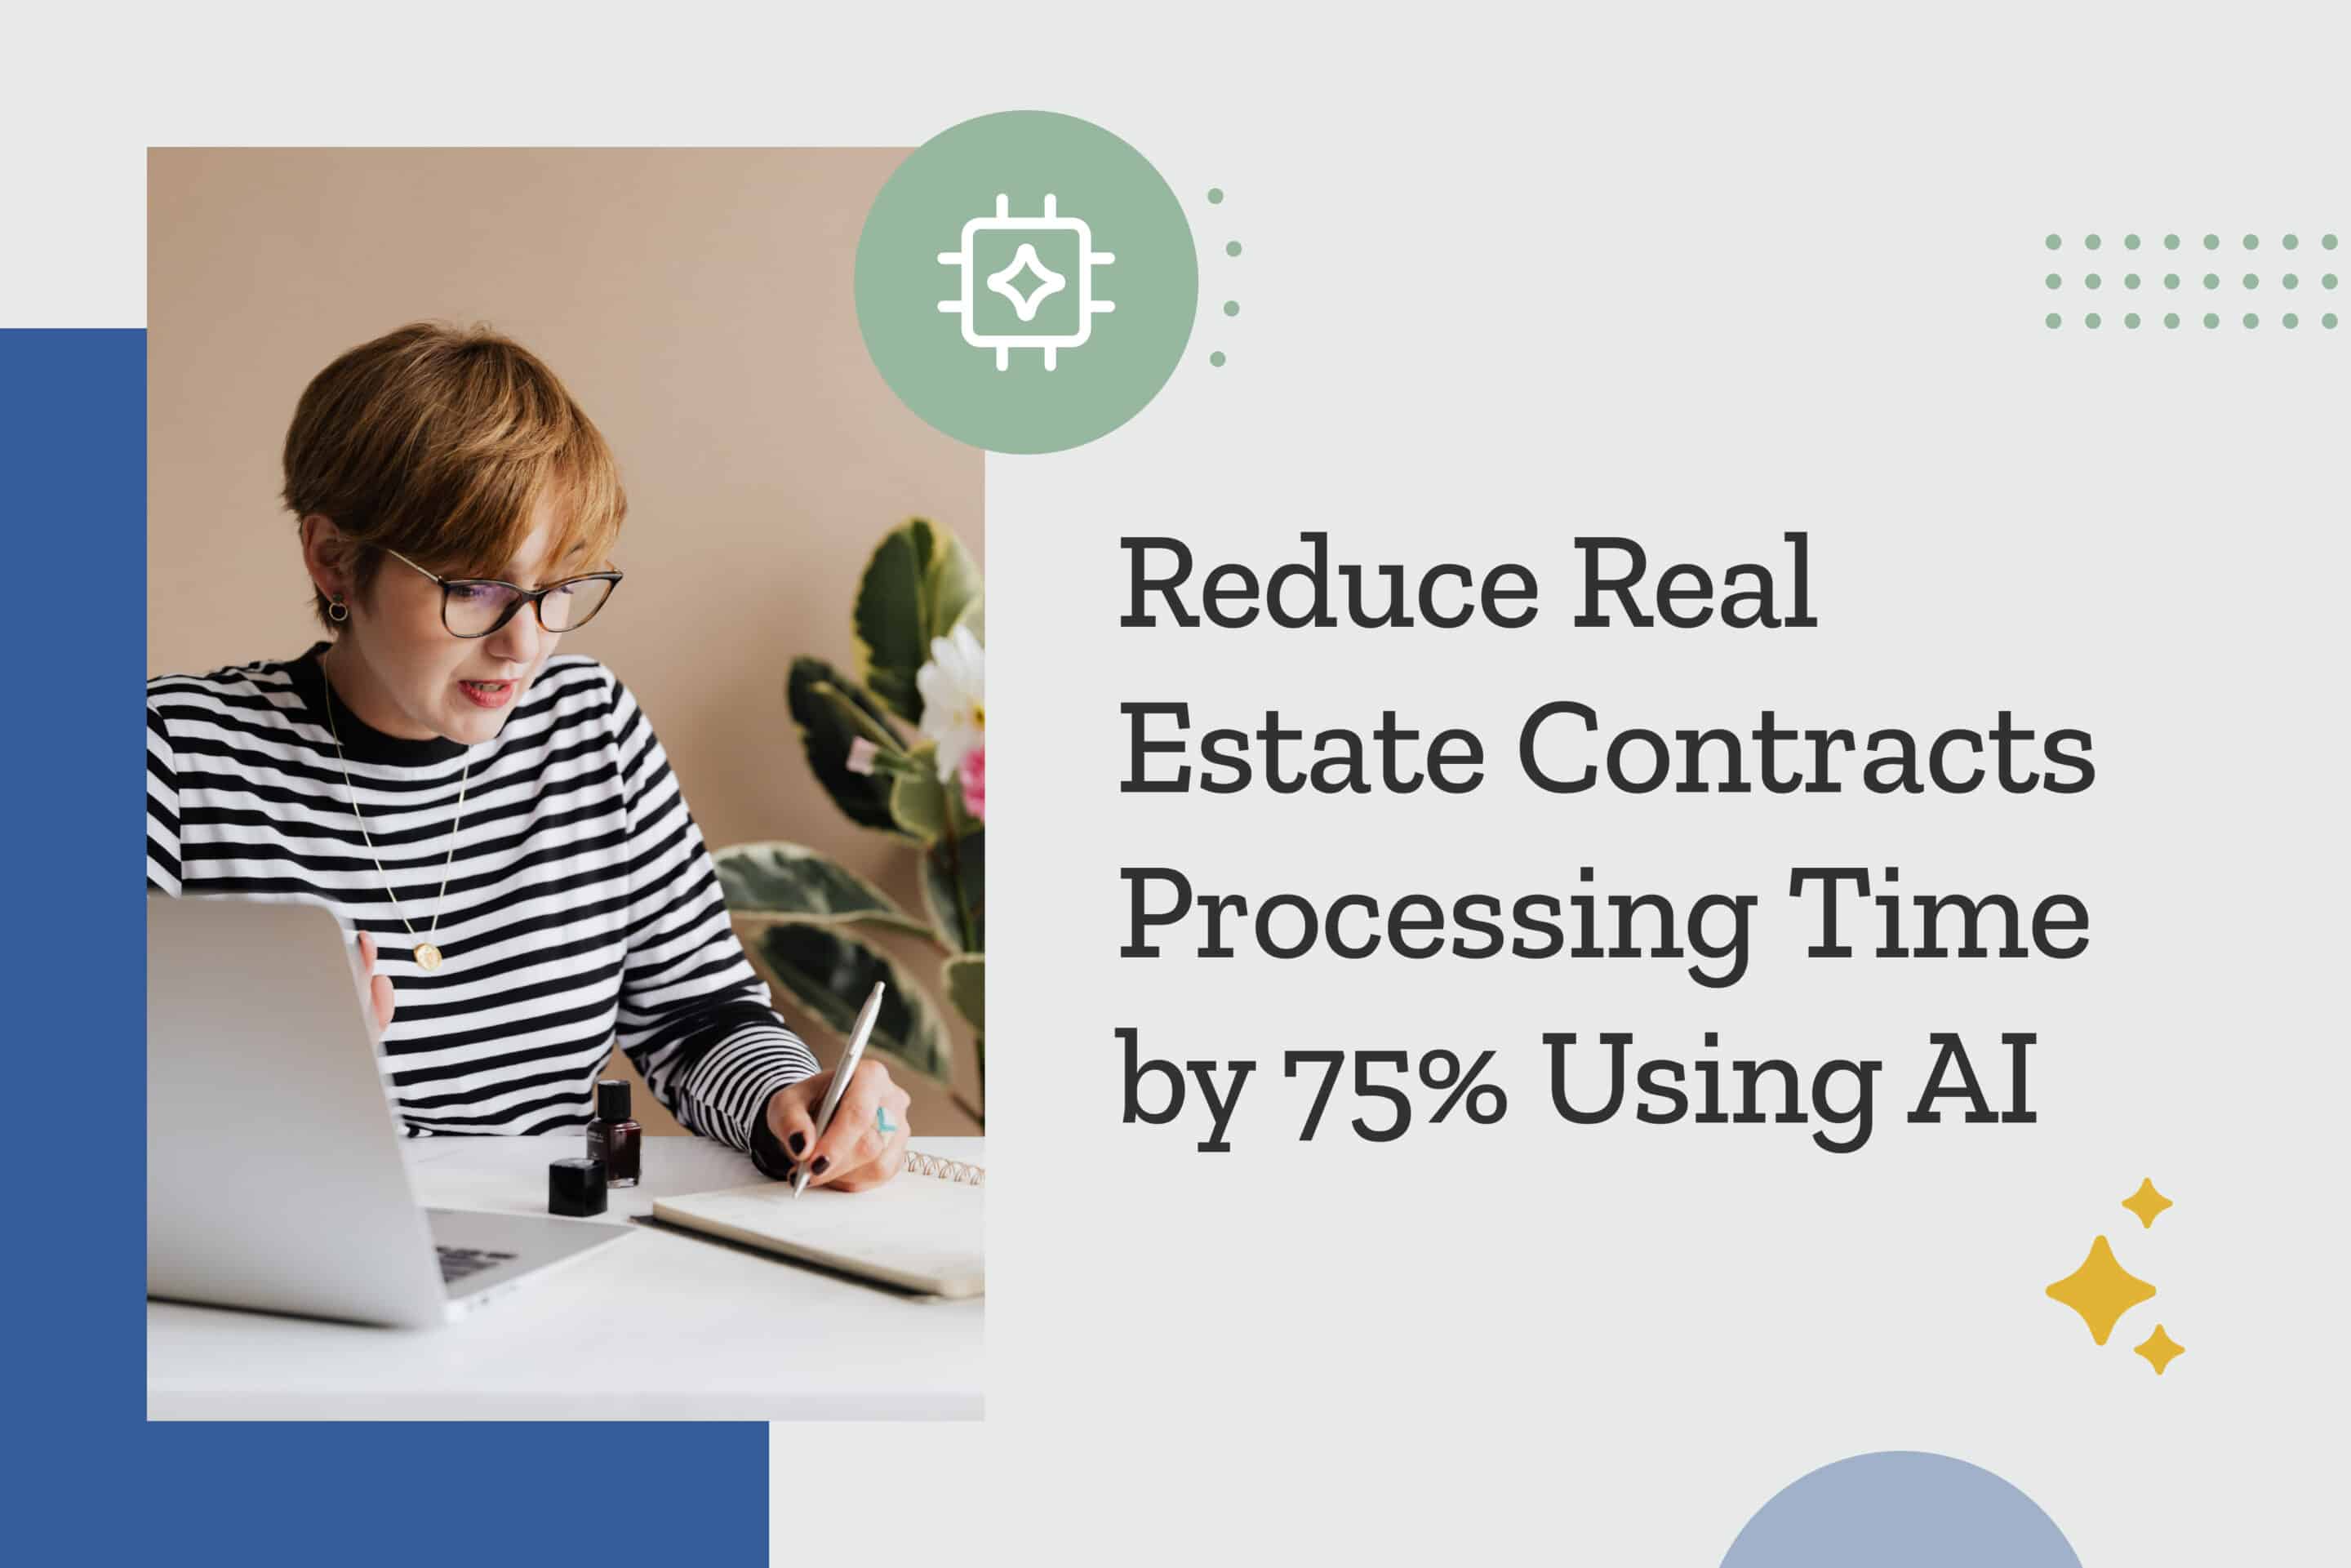 Reduce Real Estate Contracts Processing Time by 75% Using AI